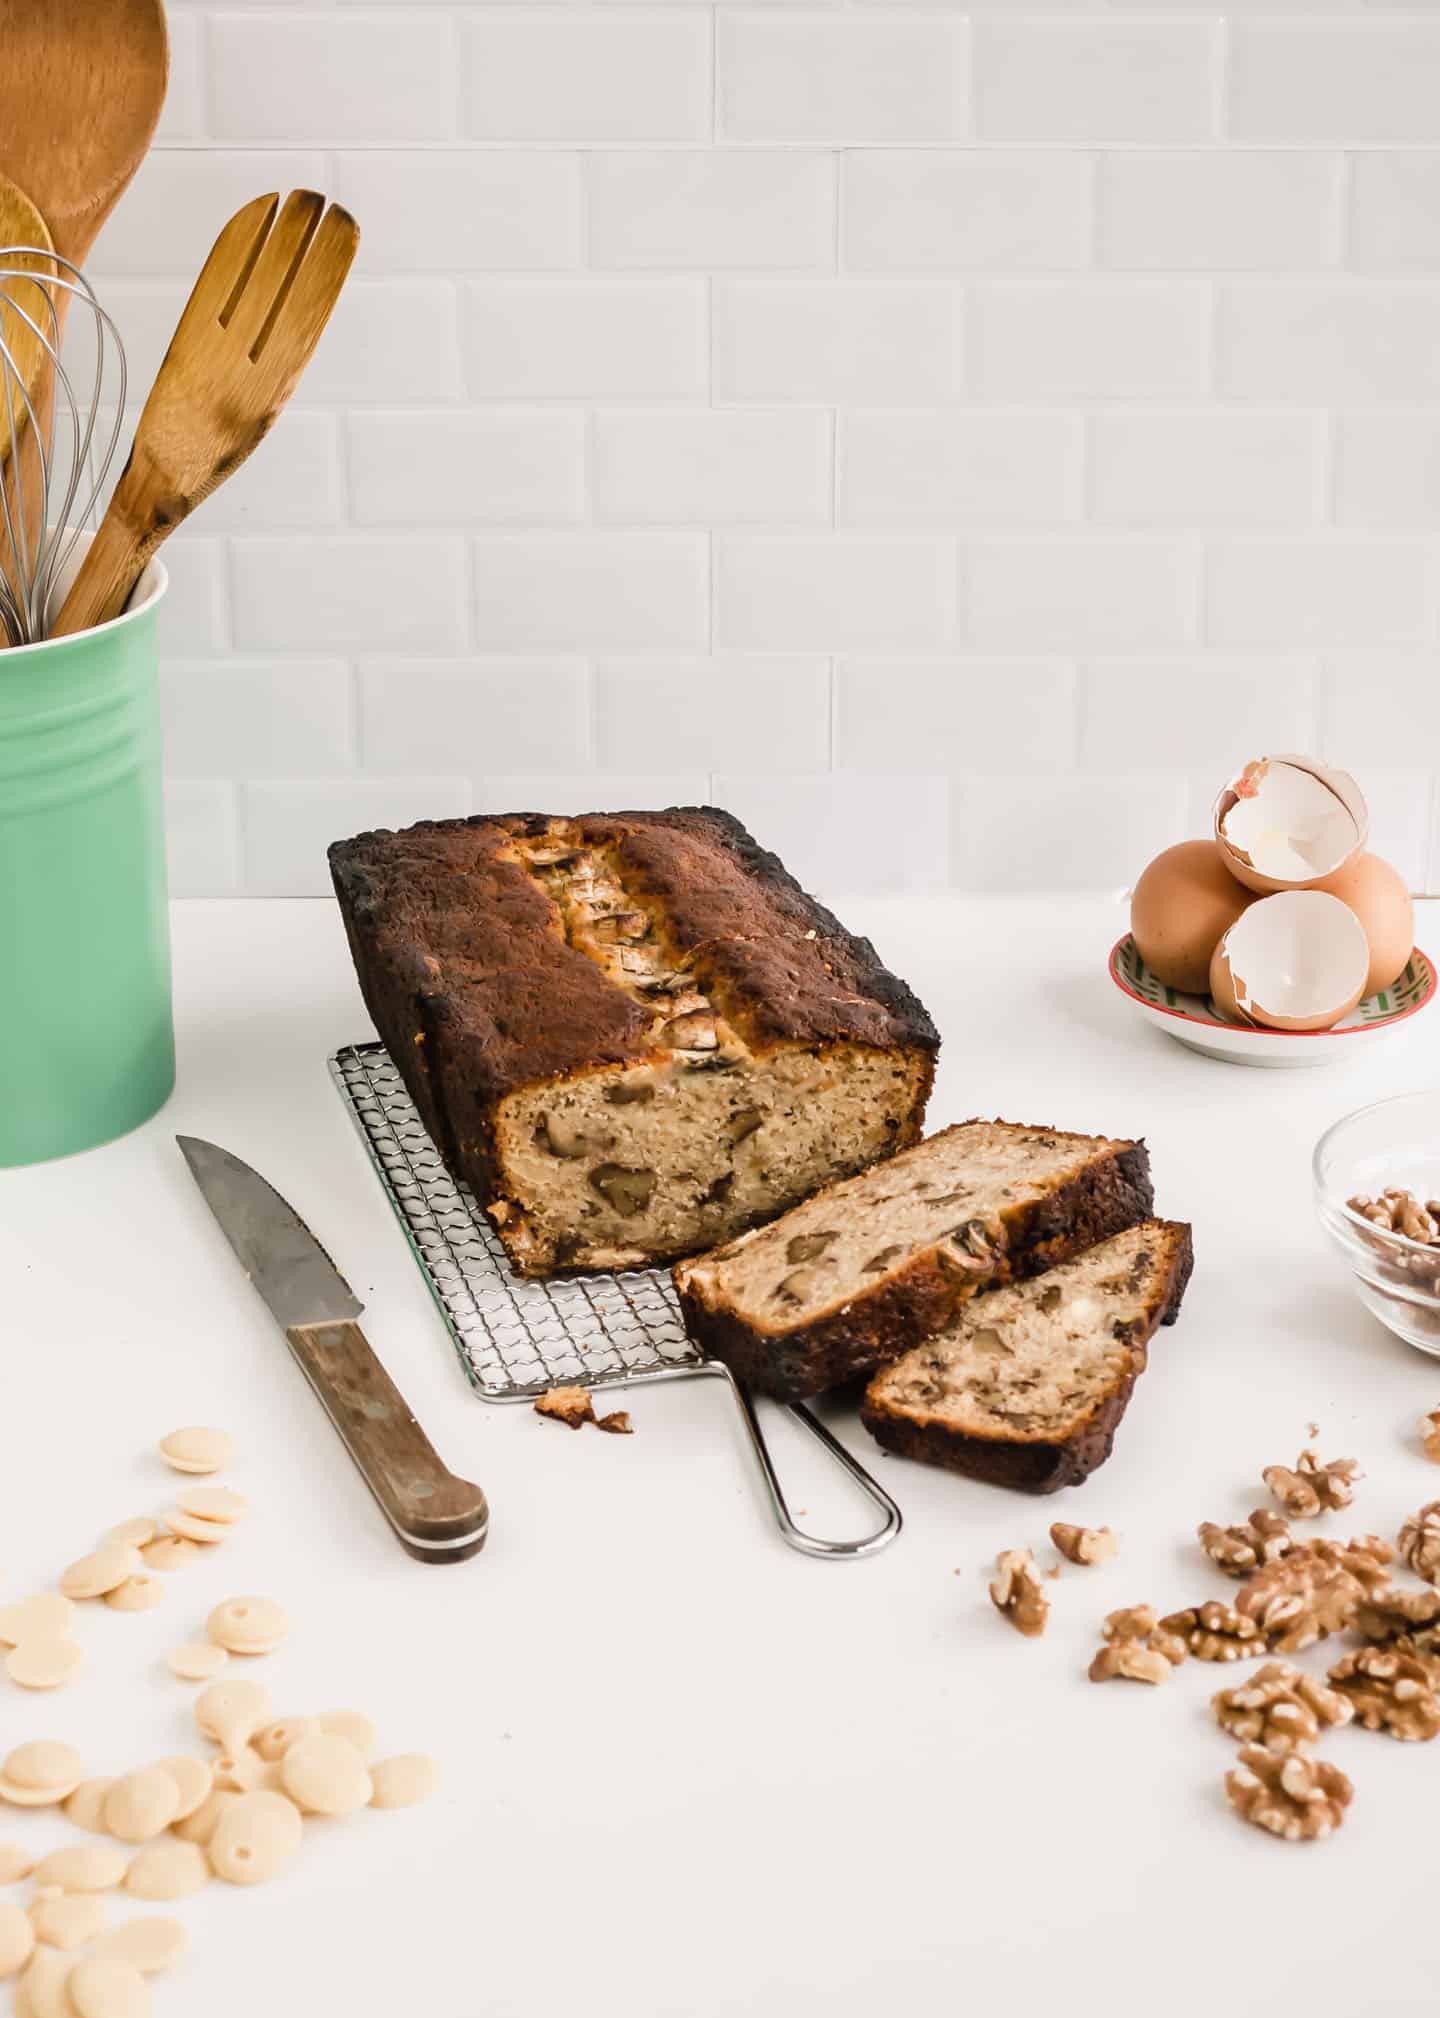 Banana Bread on a cooling rack, a knife next to it, some walnuts and white chocolate chips around it, and some egg shells behind it